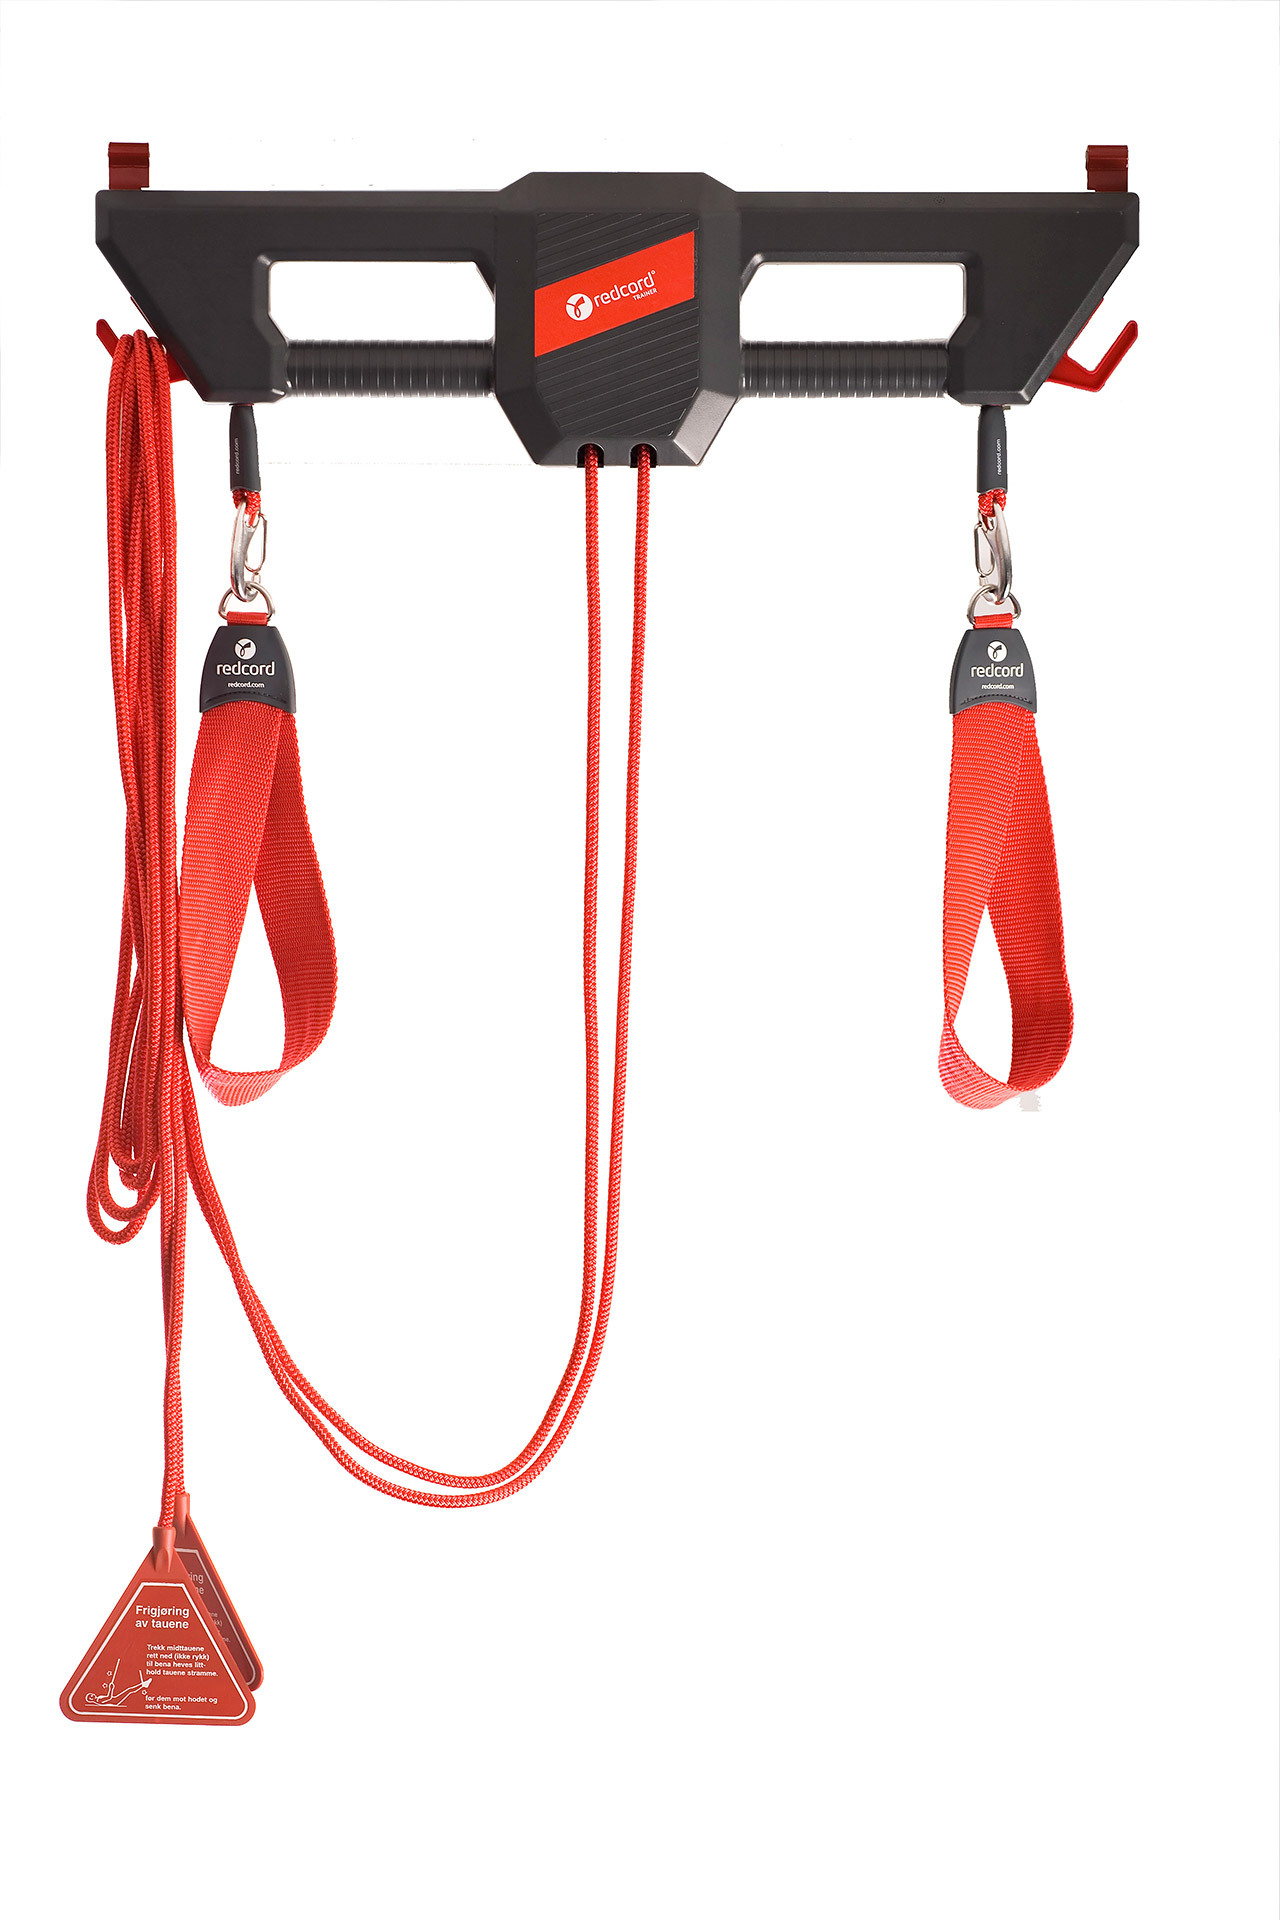 redcord Trainer